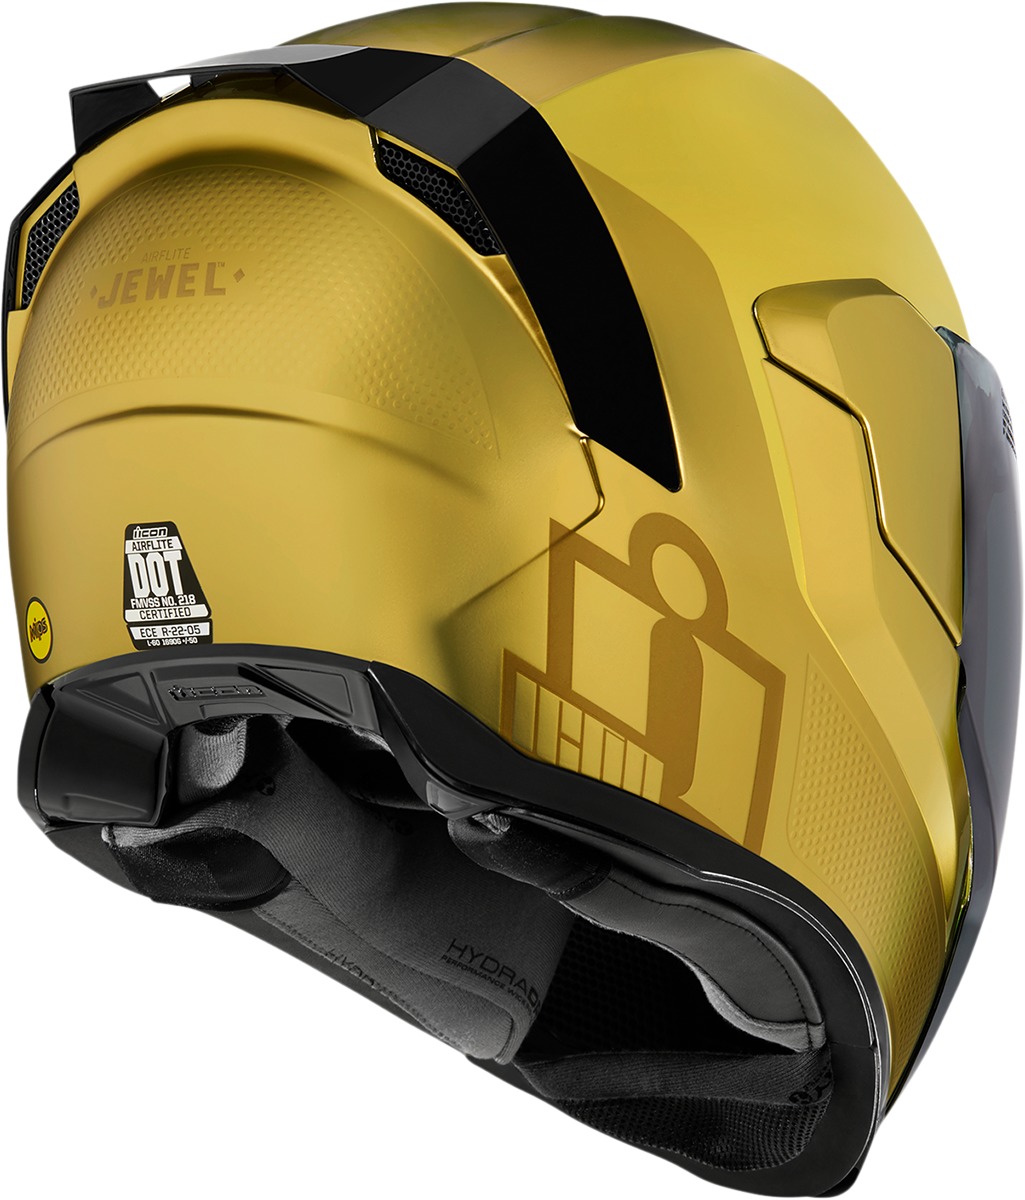 Gold Airflite Jewel MIPS Motorcycle Helmet - Large - Meets ECE 22.05 and DOT FMVSS-218 Standards - Click Image to Close